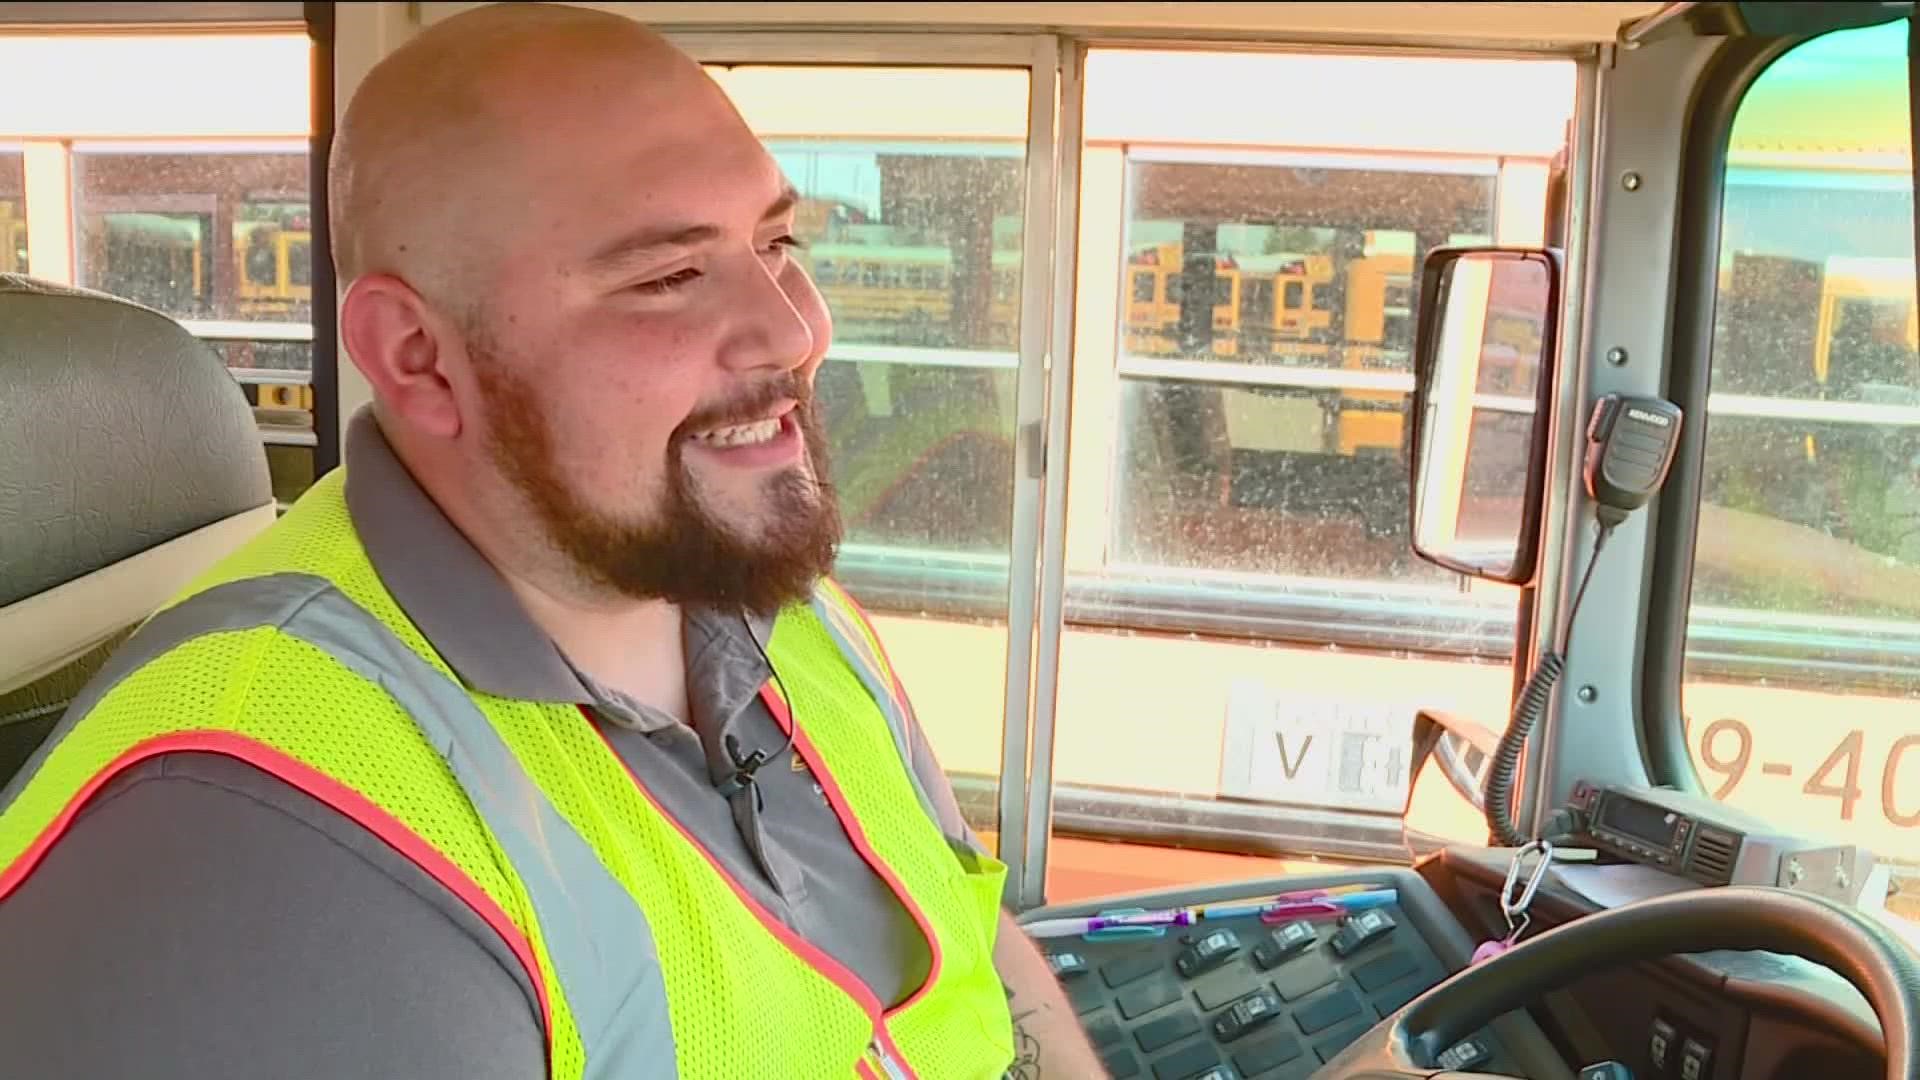 Eric Jimenez says he sends the letter home to introduce himself to families, and to create a culture of kindness on his bus. He says he wants to make an impact.